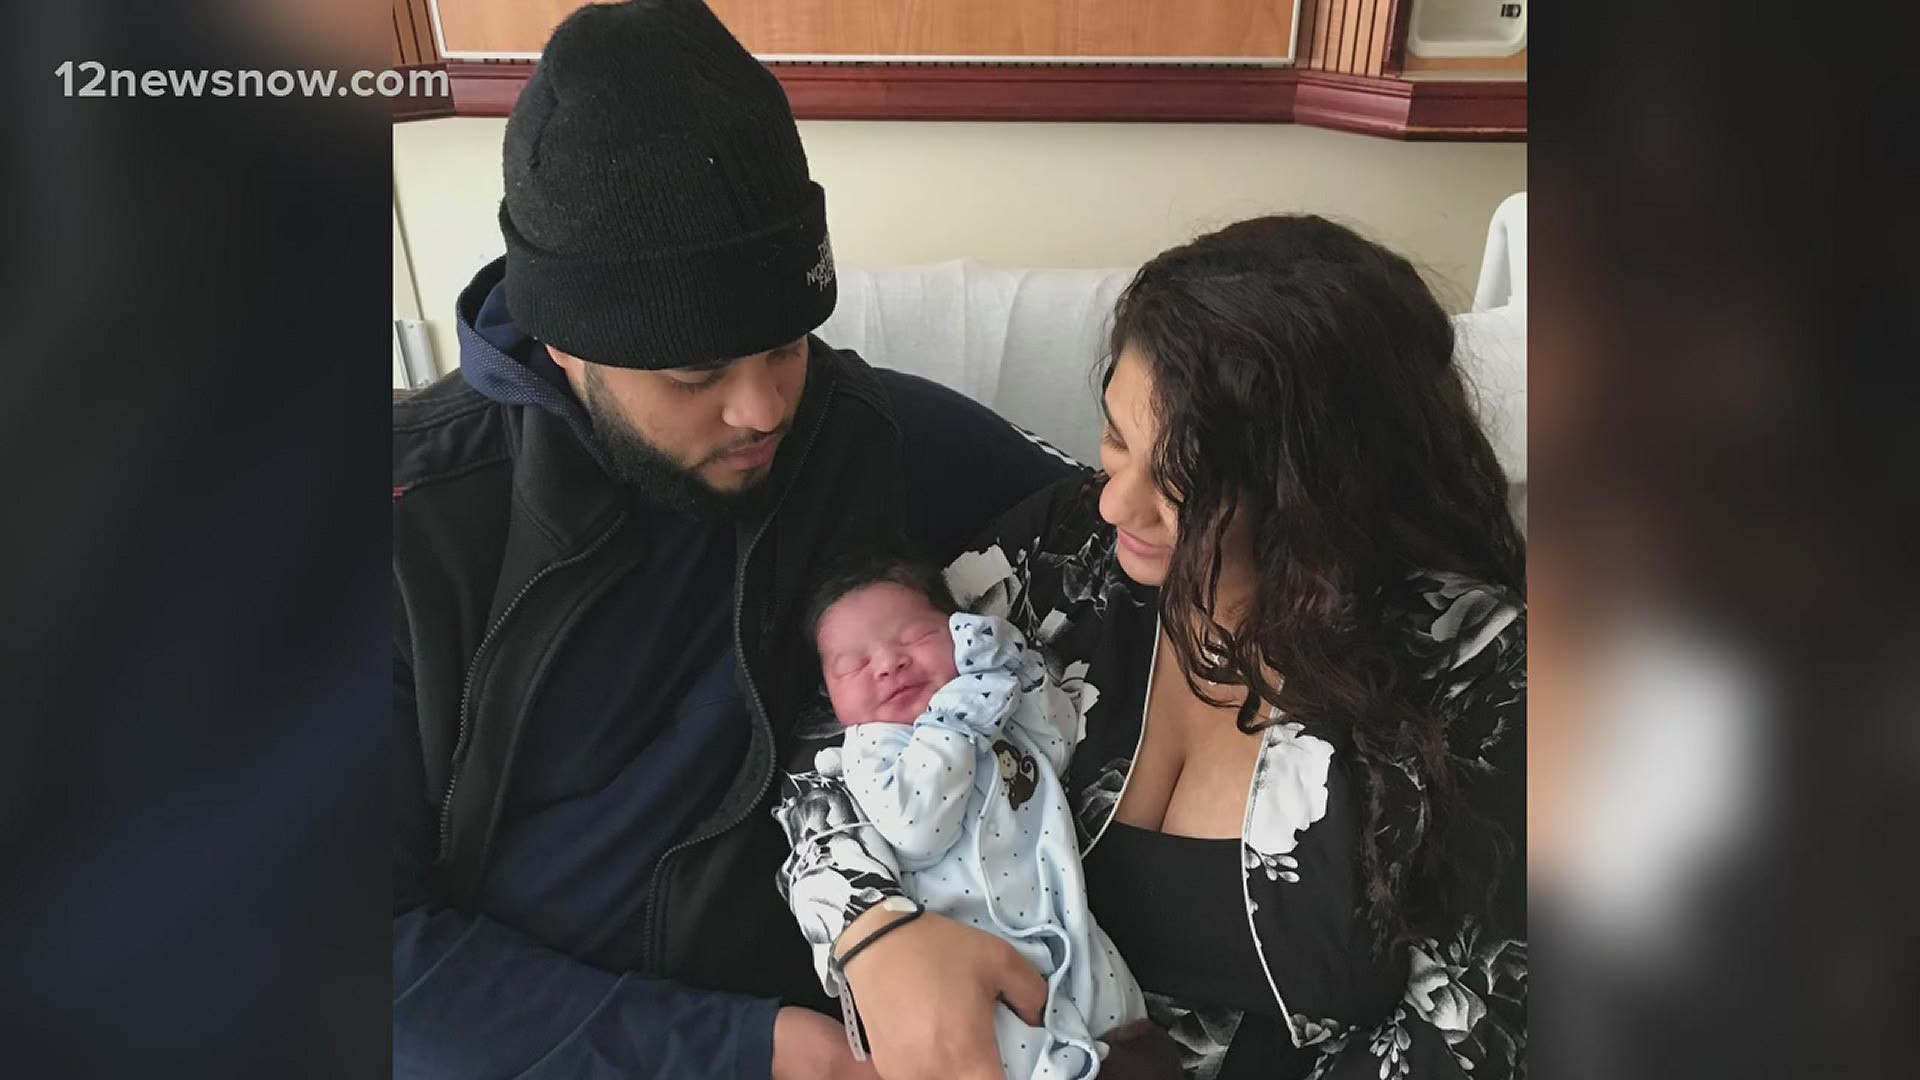 What an extra special way to ring in the New Year! Southeast Texas welcomed the first baby.